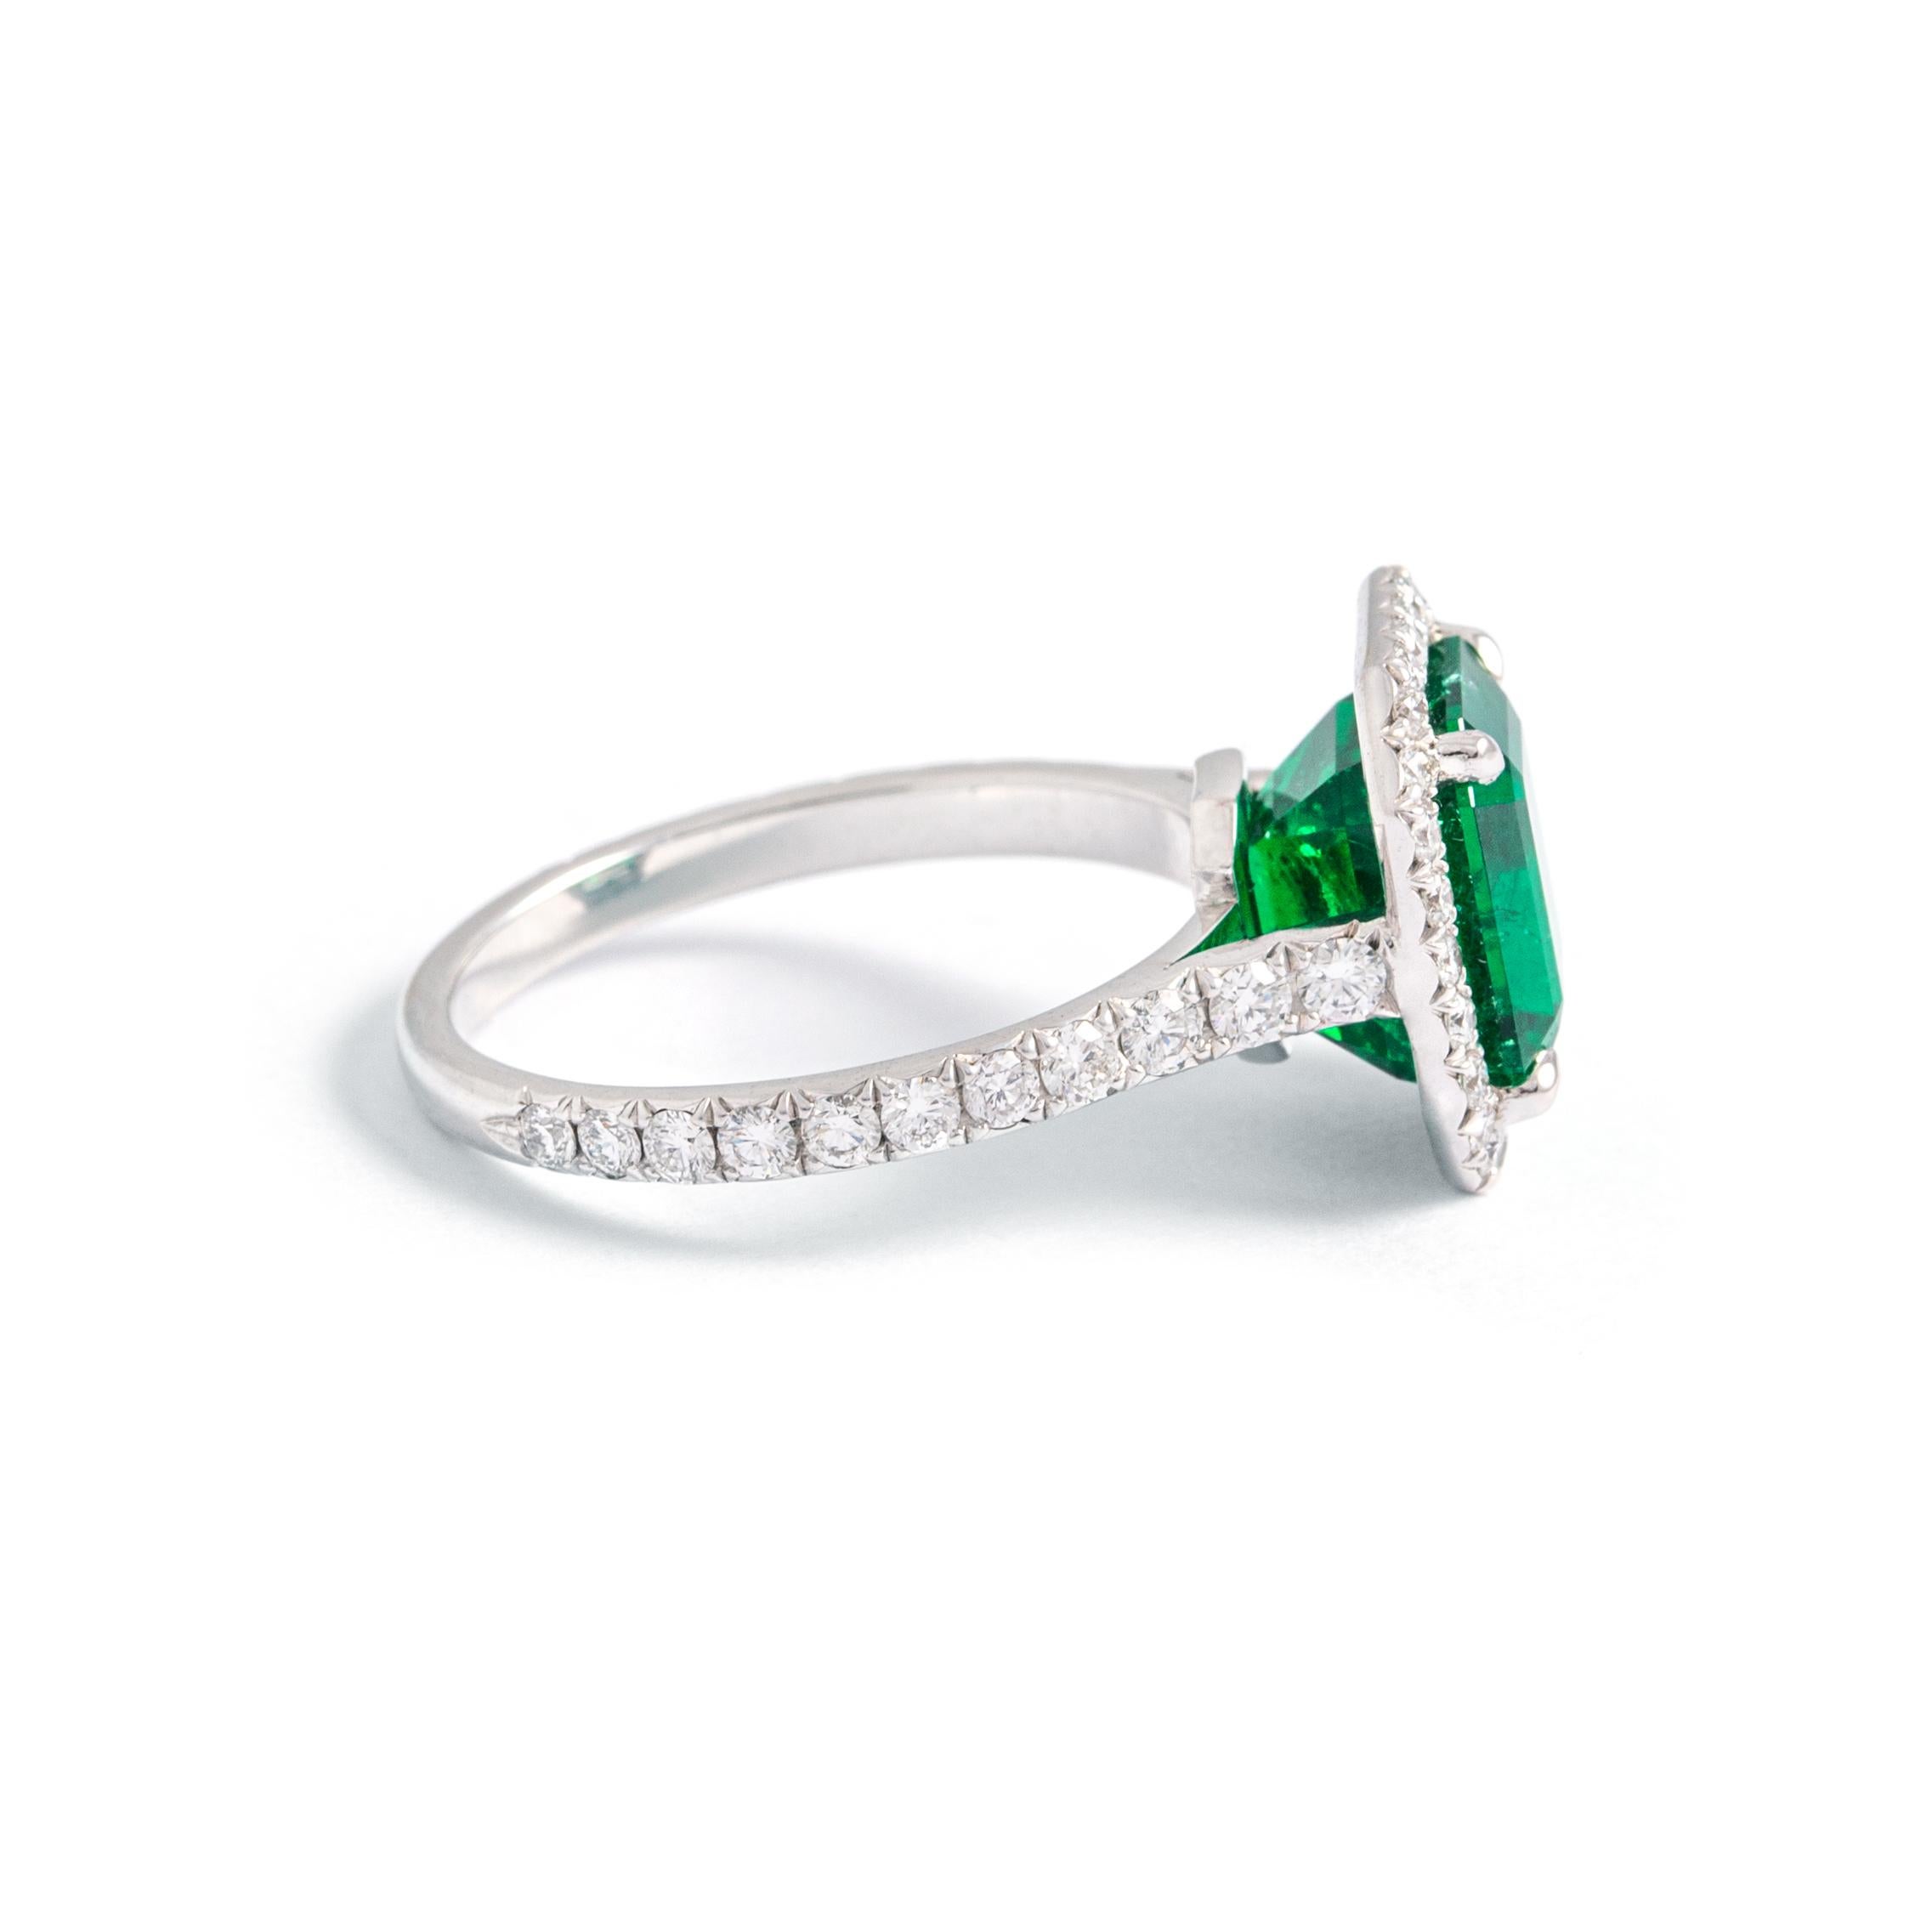 Emerald Cut 3.85 Carat Emerald and Diamond Ring For Sale